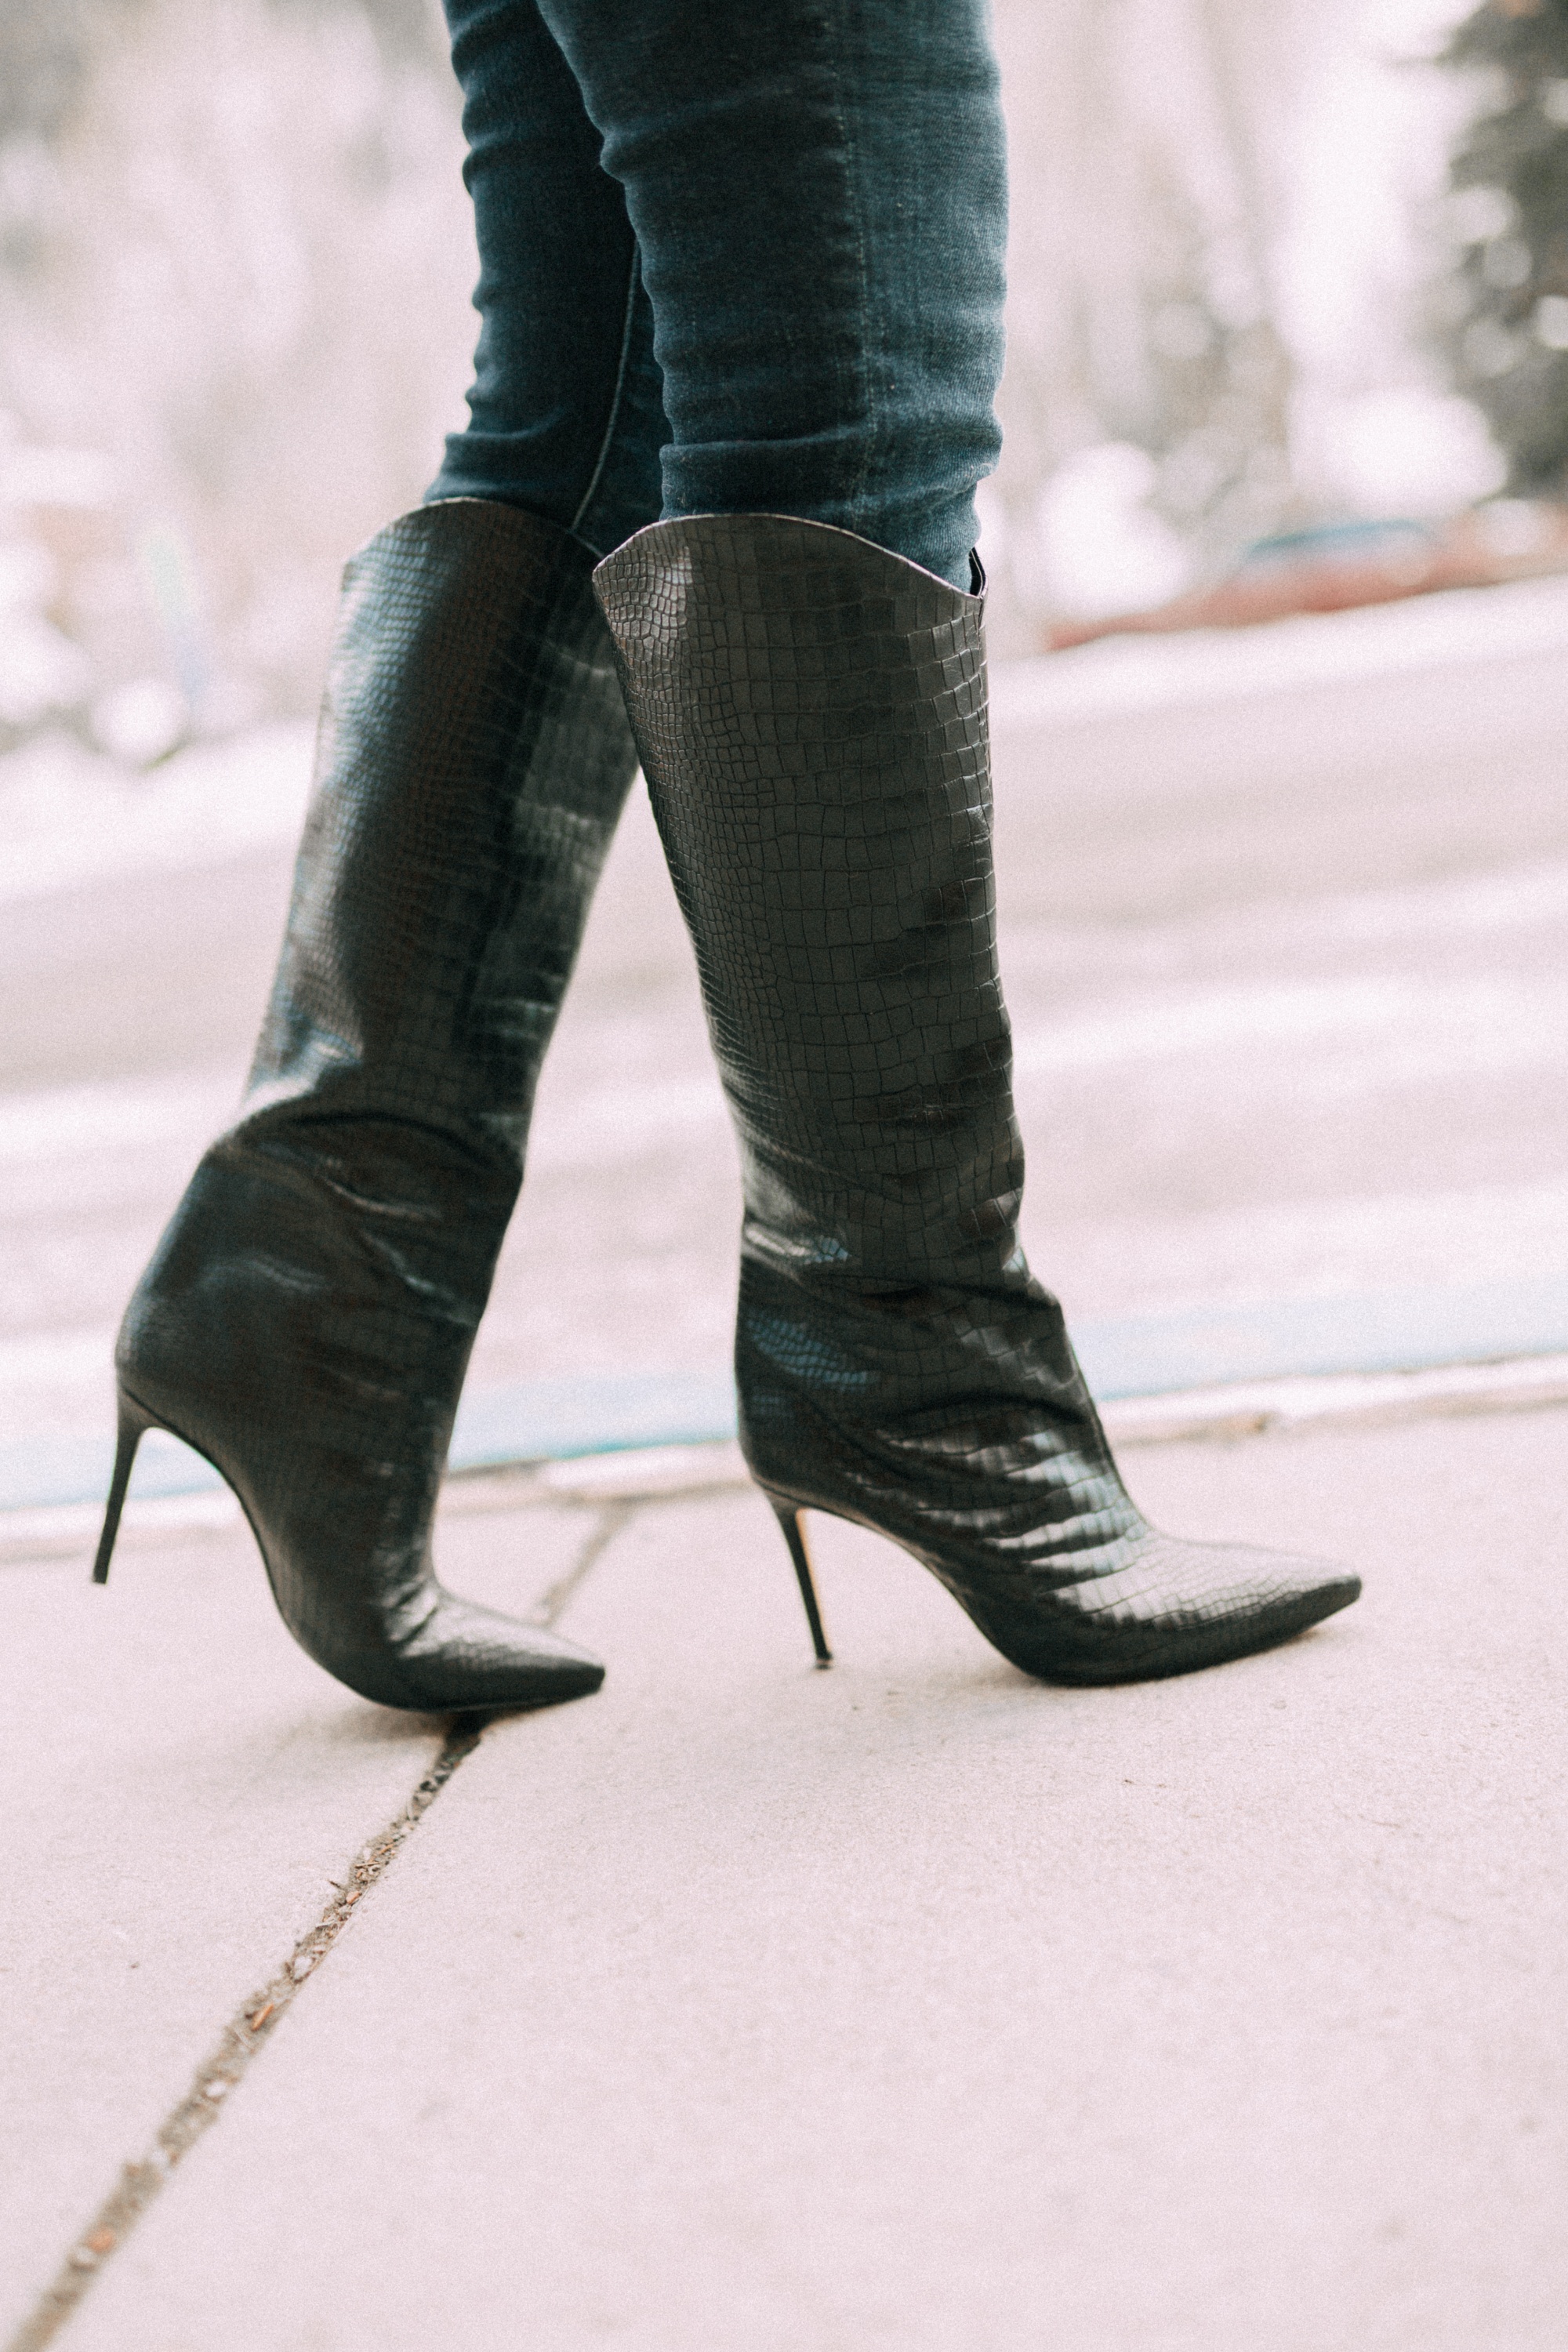 Fashion blogger Erin Busbee of BusbeeStyle.com wearing black leather embossed boots by Shultz from Bloomingdales with affordable cashmere sweaters